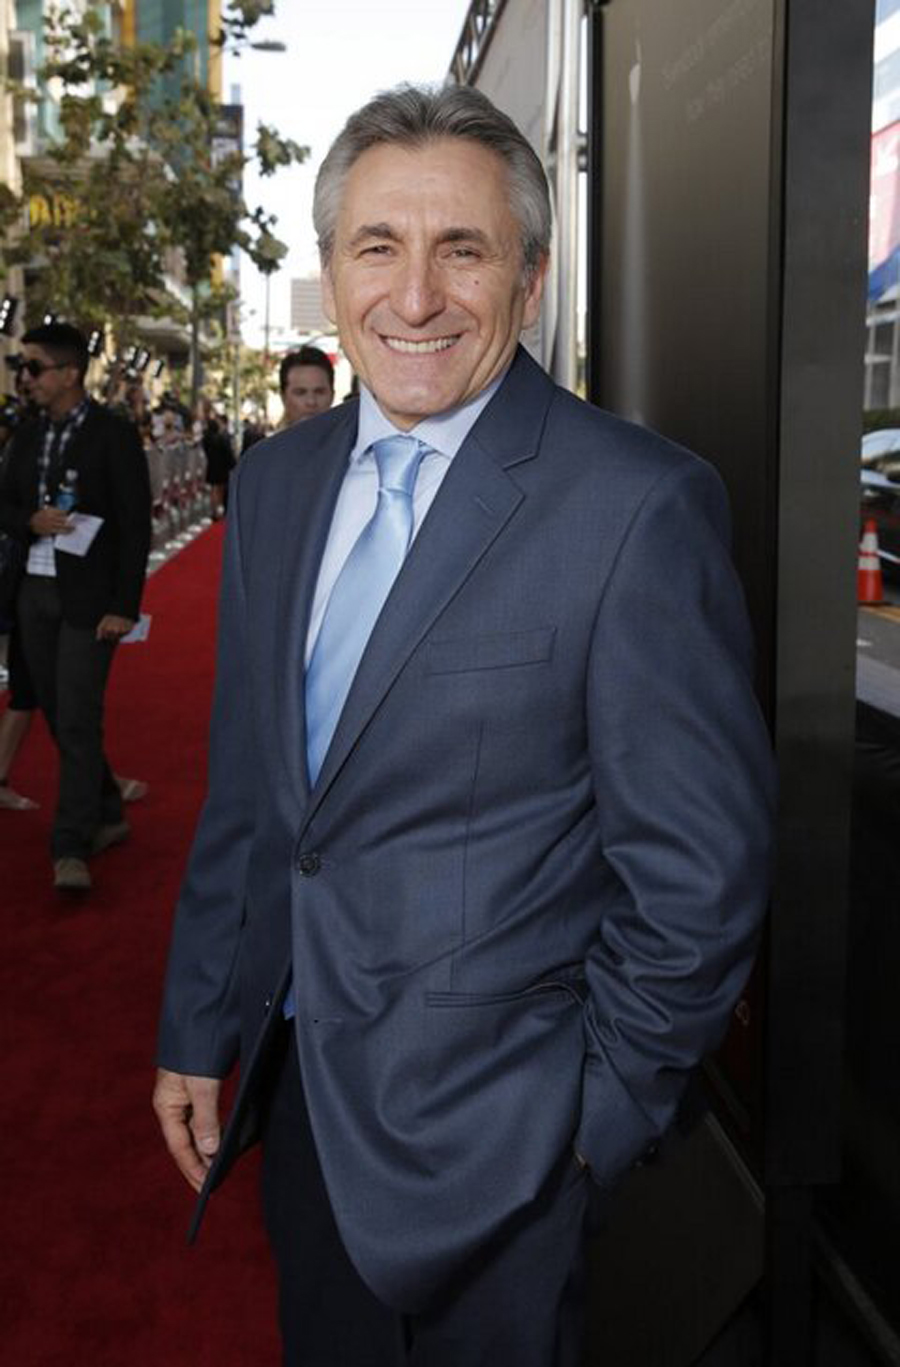 Lou Volpe on the red carpet for the Jersey Boys movie premiere at the 2014 Los Angeles Film Festival.